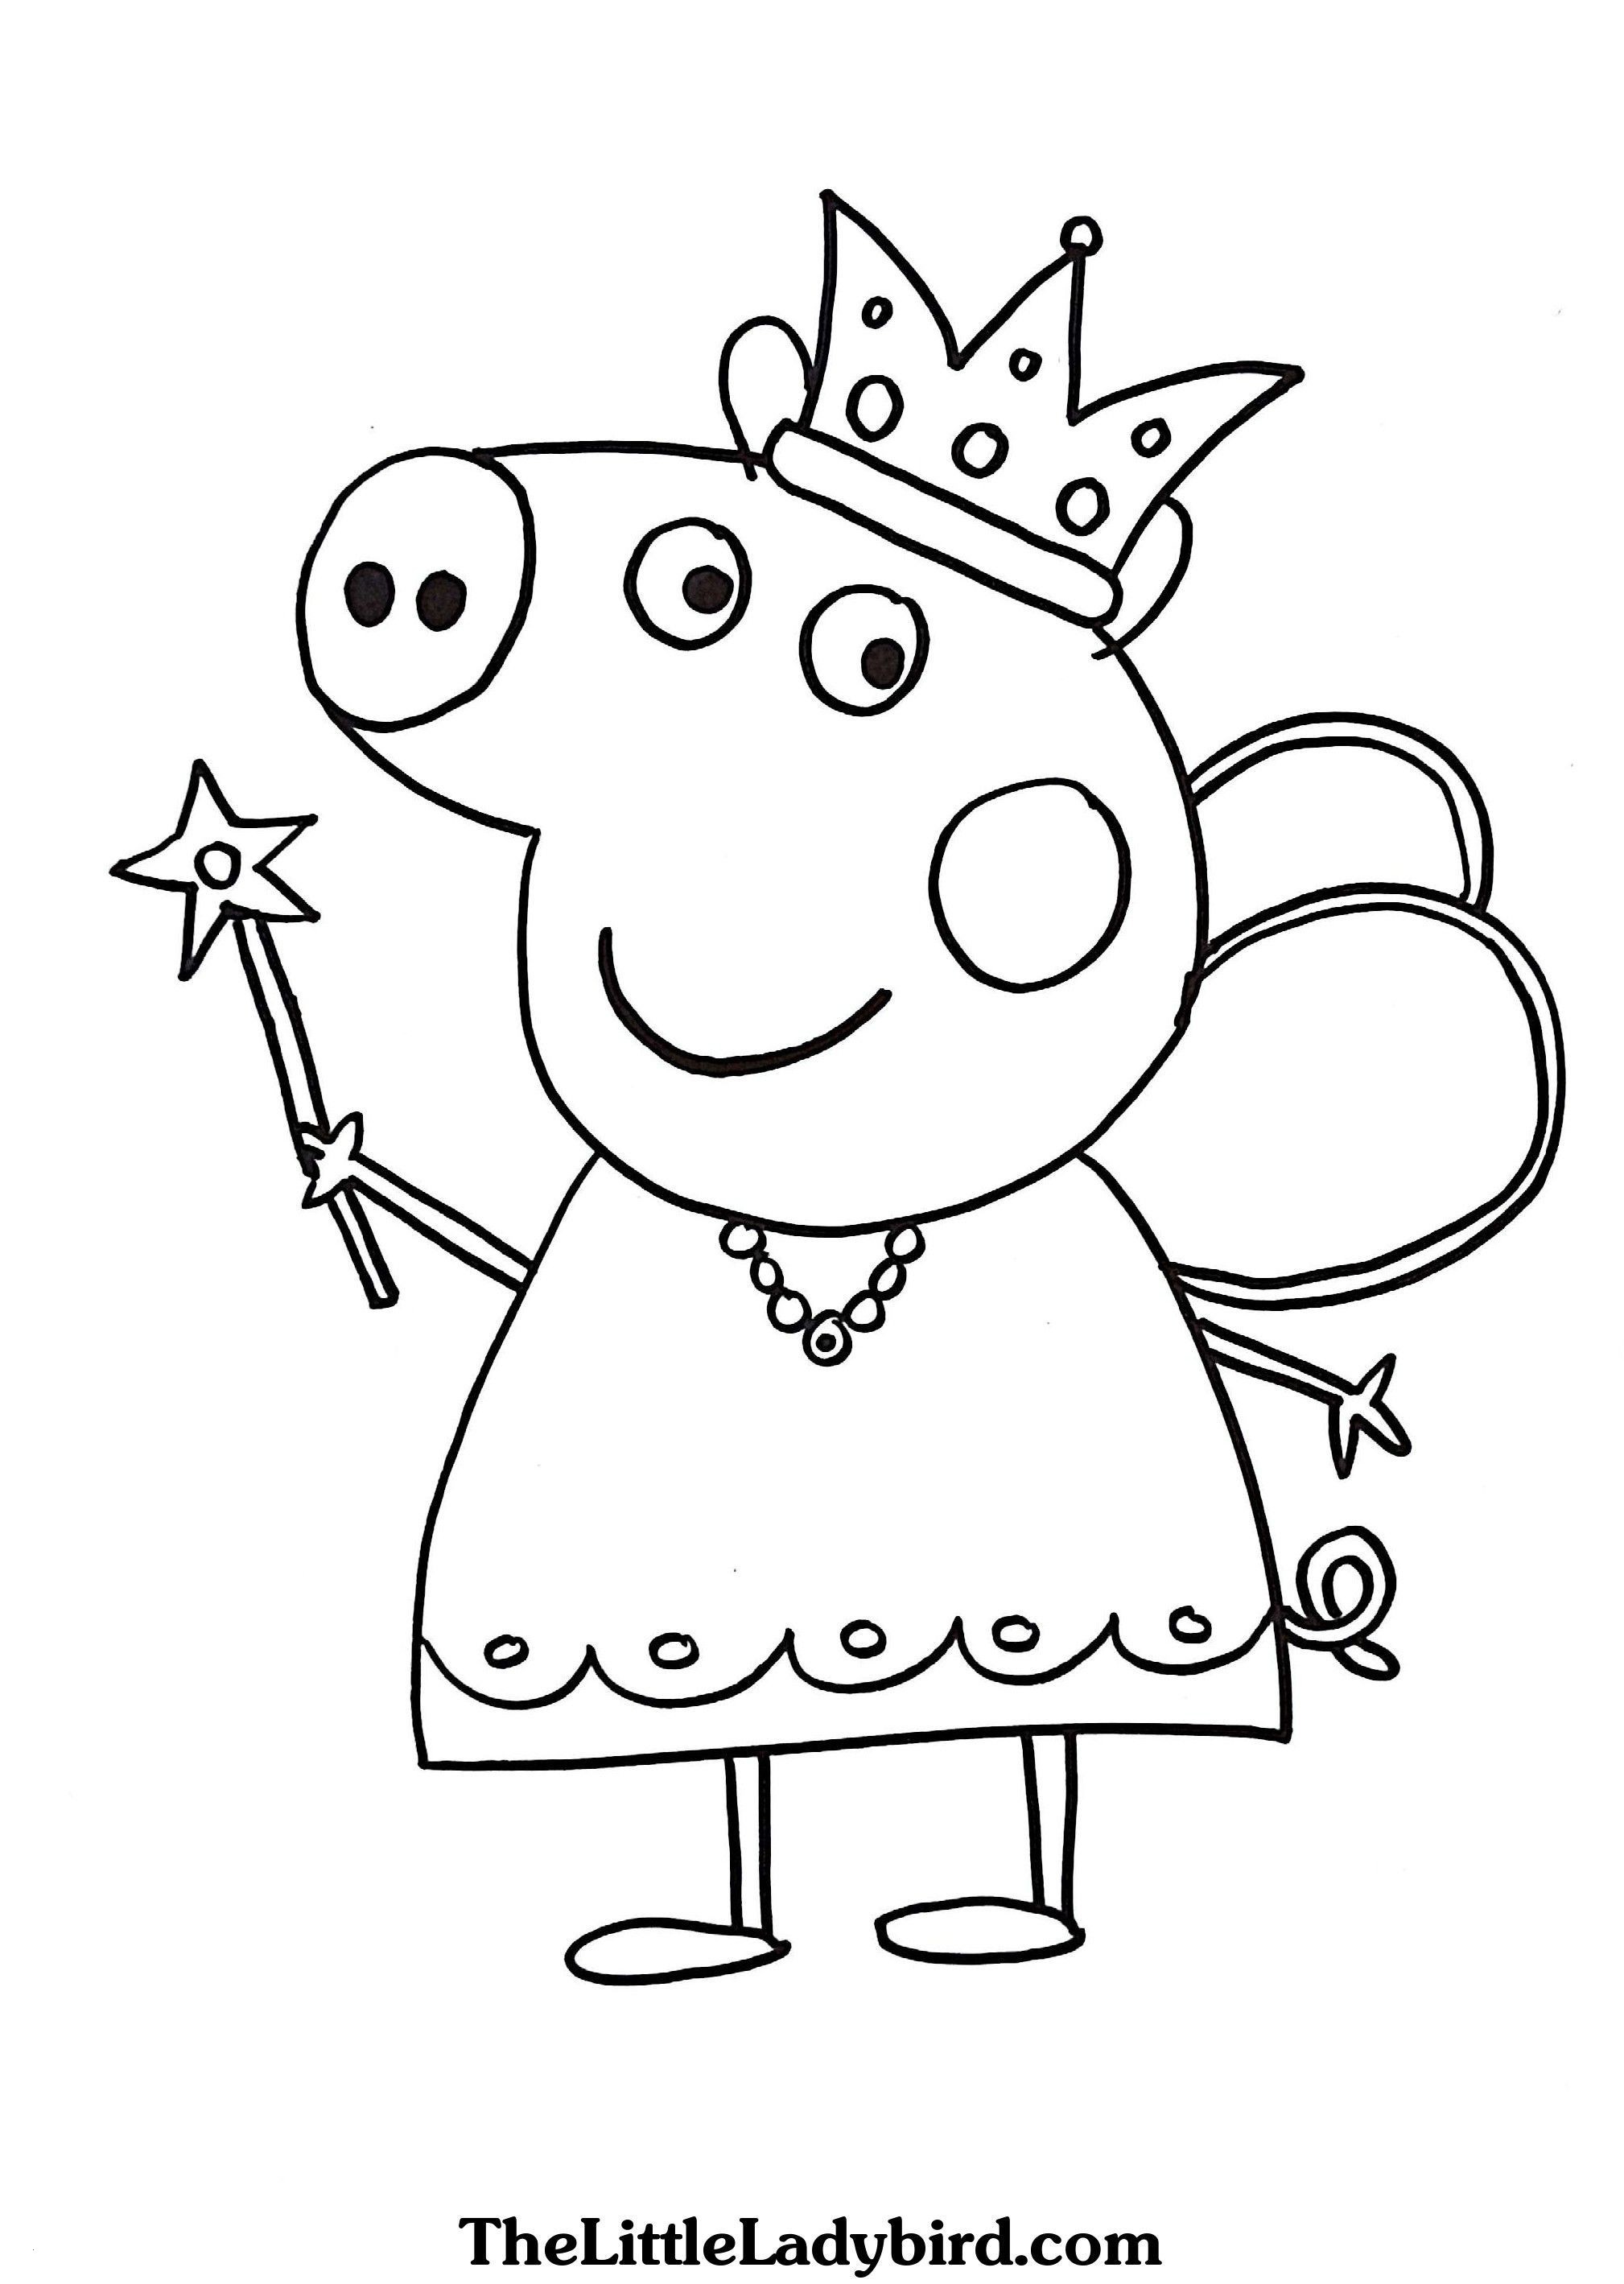 Coloring Pages line Peppa Pig Best Coloring Book Top 15 Free Printable Peppa Pig Pages Line